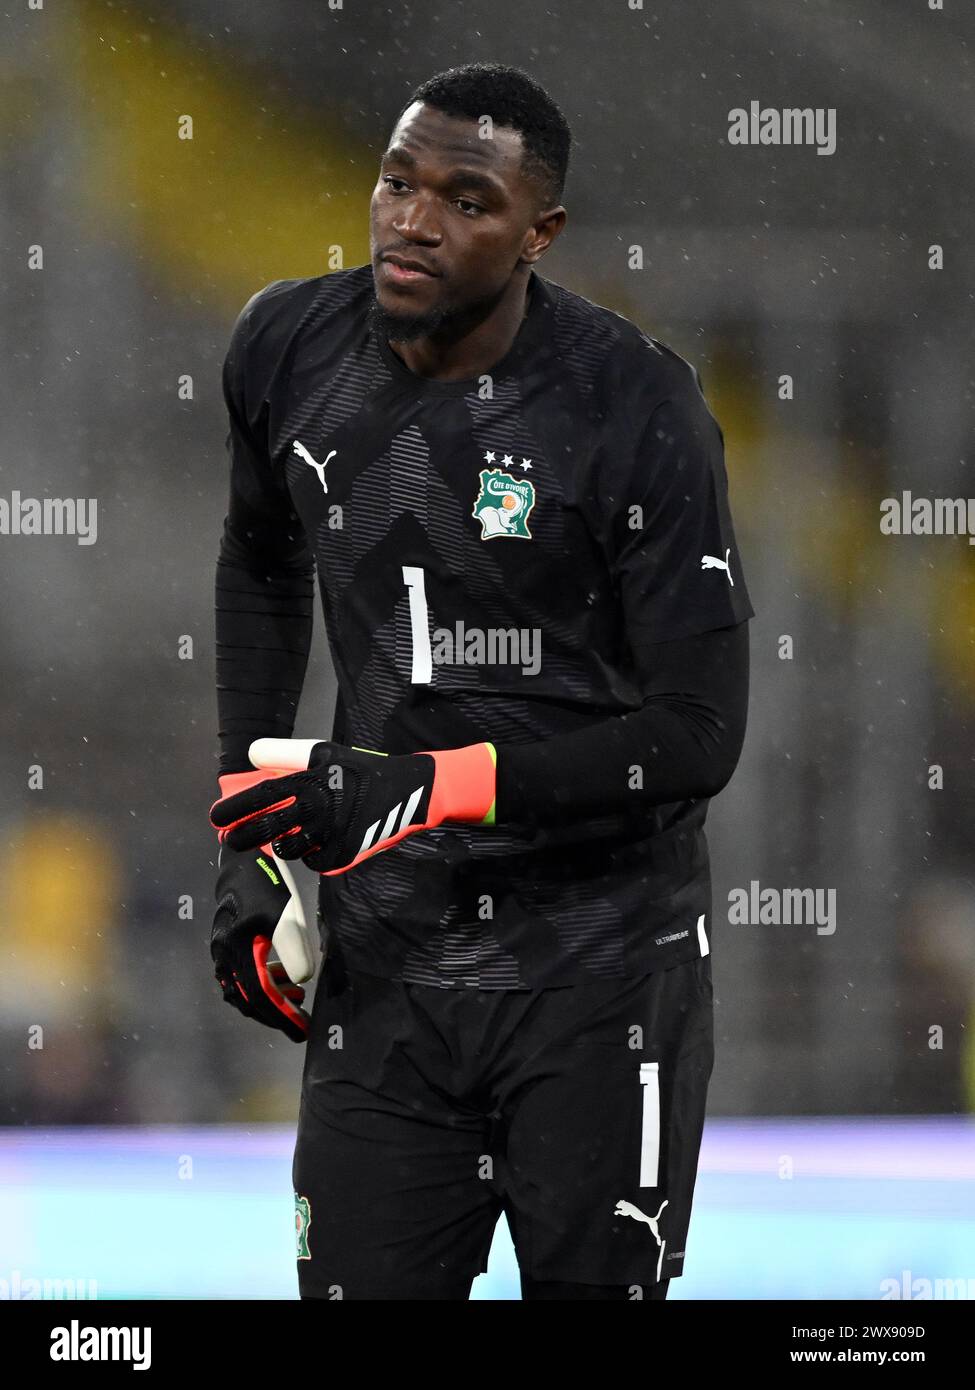 LENS - Ivory Coast goalkeeper Yahia Fofana during the friendly Interland match between Ivory Coast and Uruguay at Stade Bollaert Delelis on March 26, 2024 in Lens, France. ANP | Hollandse Hoogte | GERRIT VAN COLOGNE Stock Photo